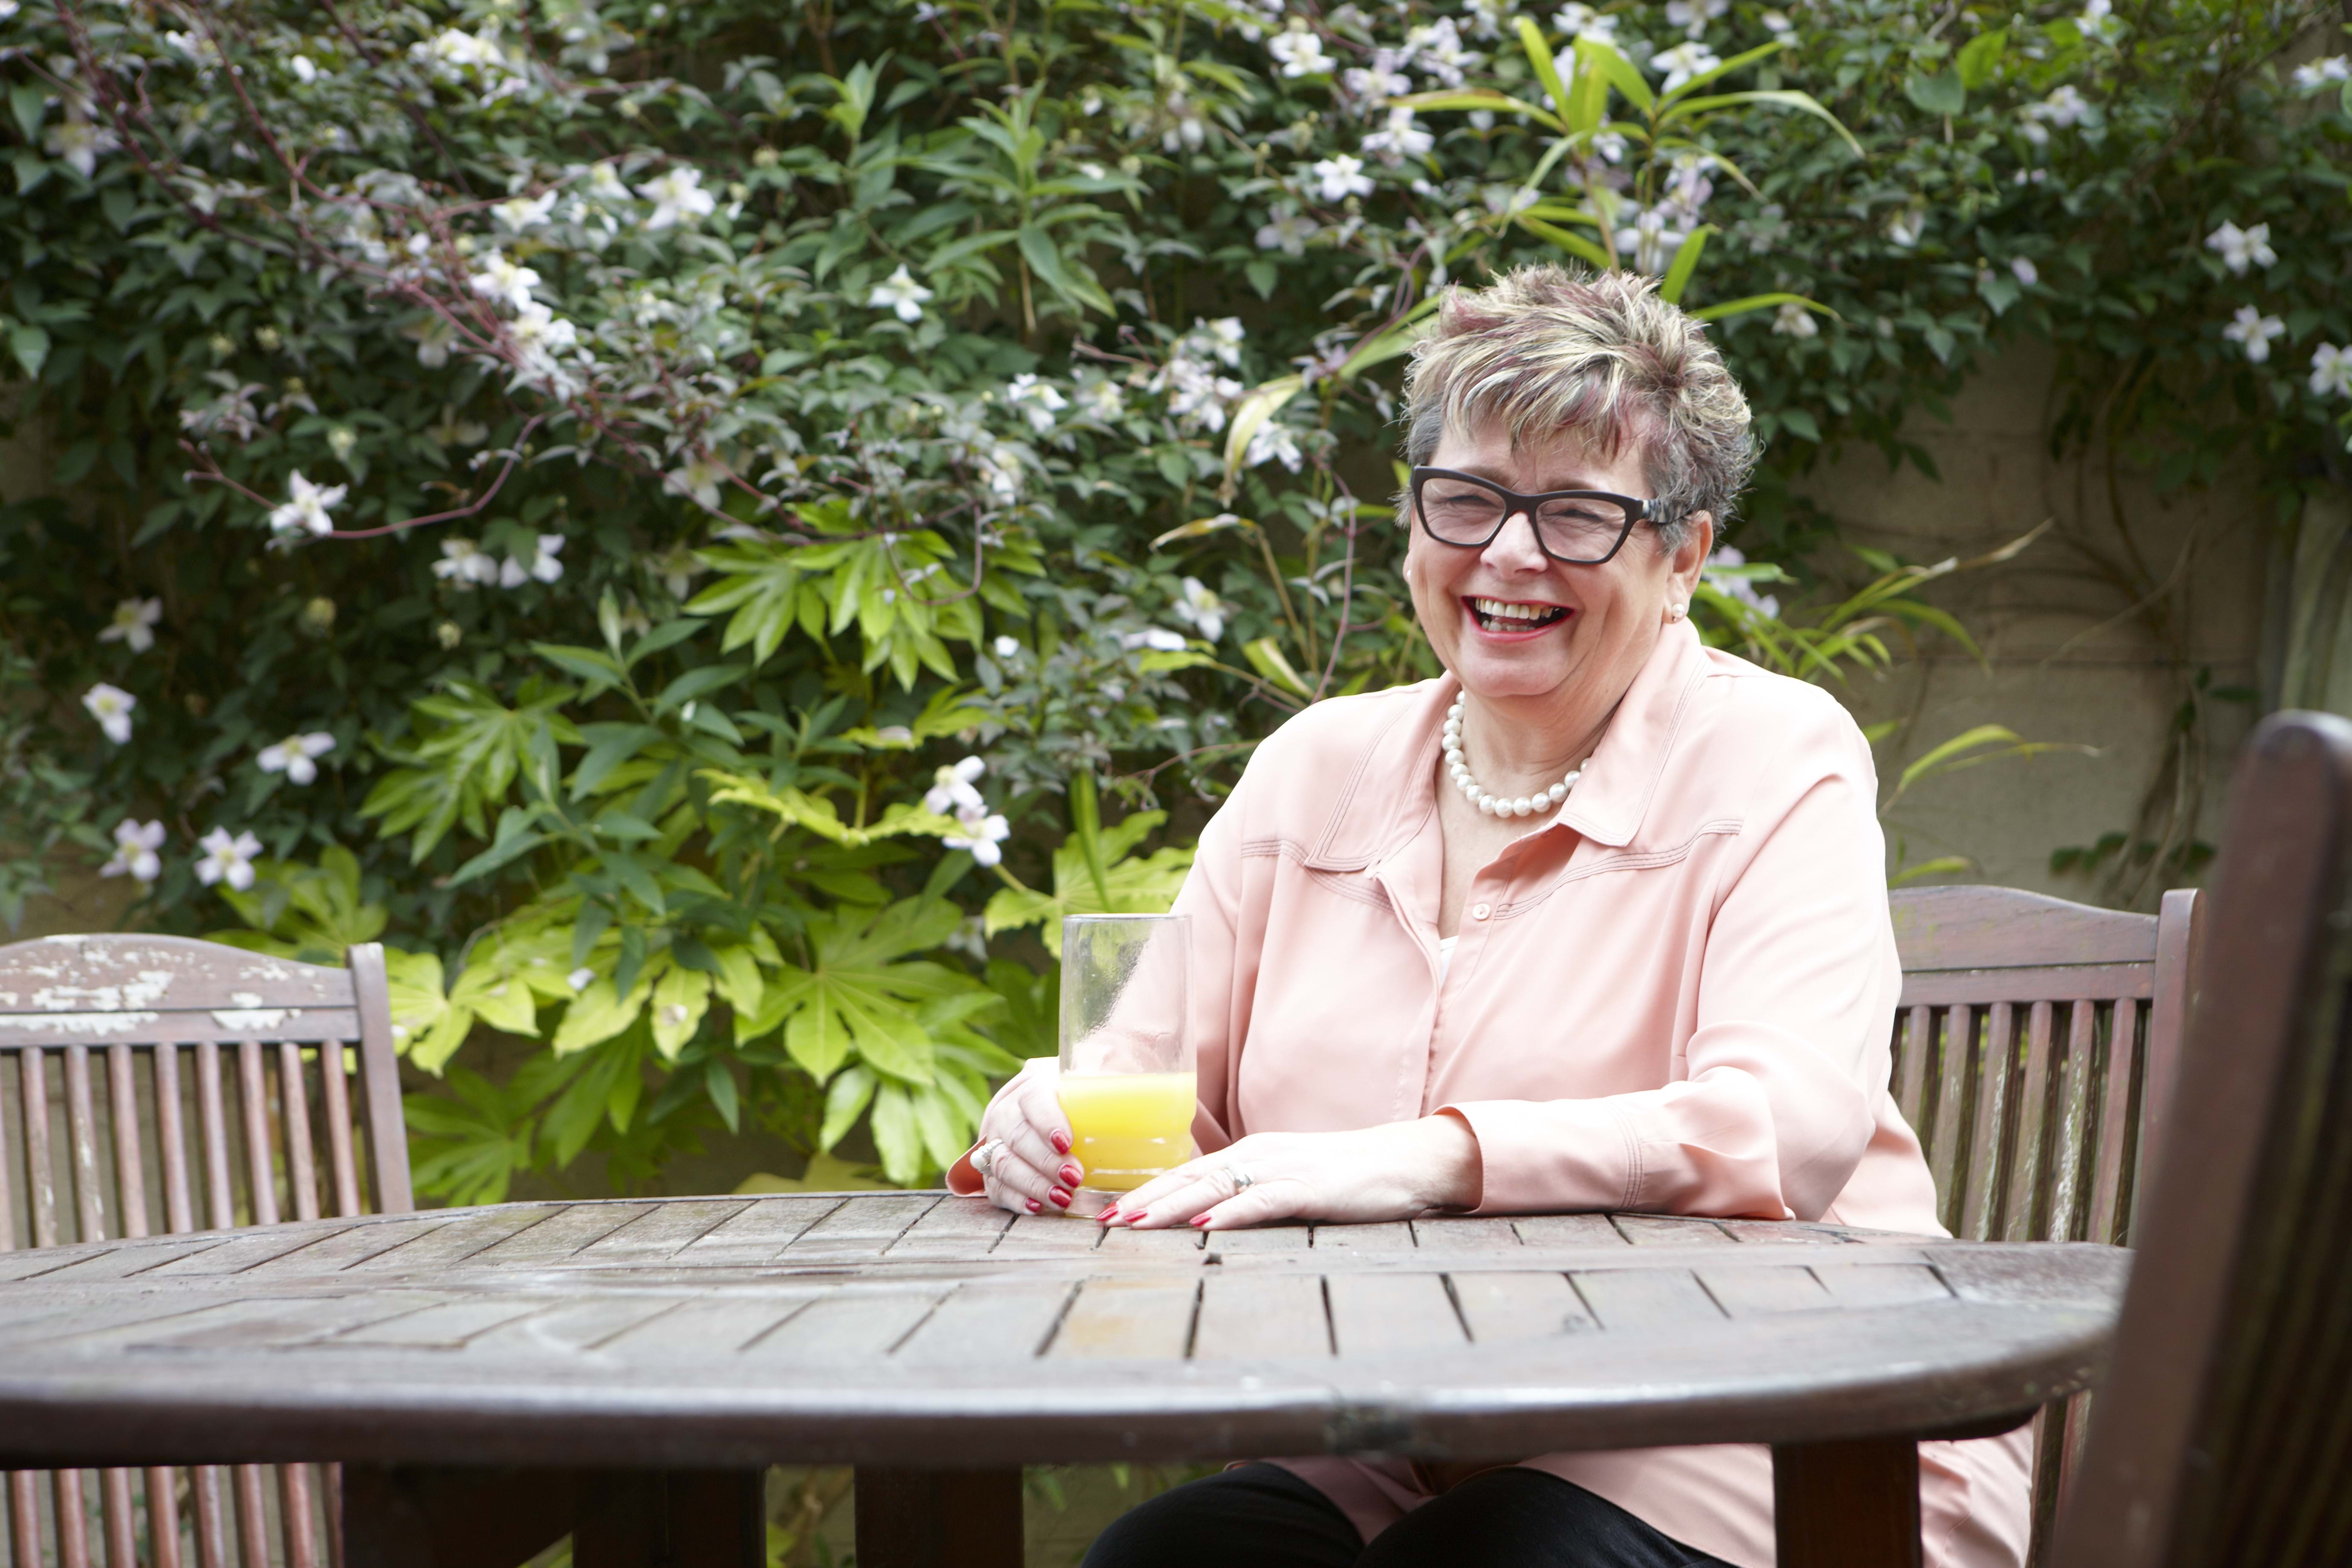 An elderly lady sits at a garden table smiling